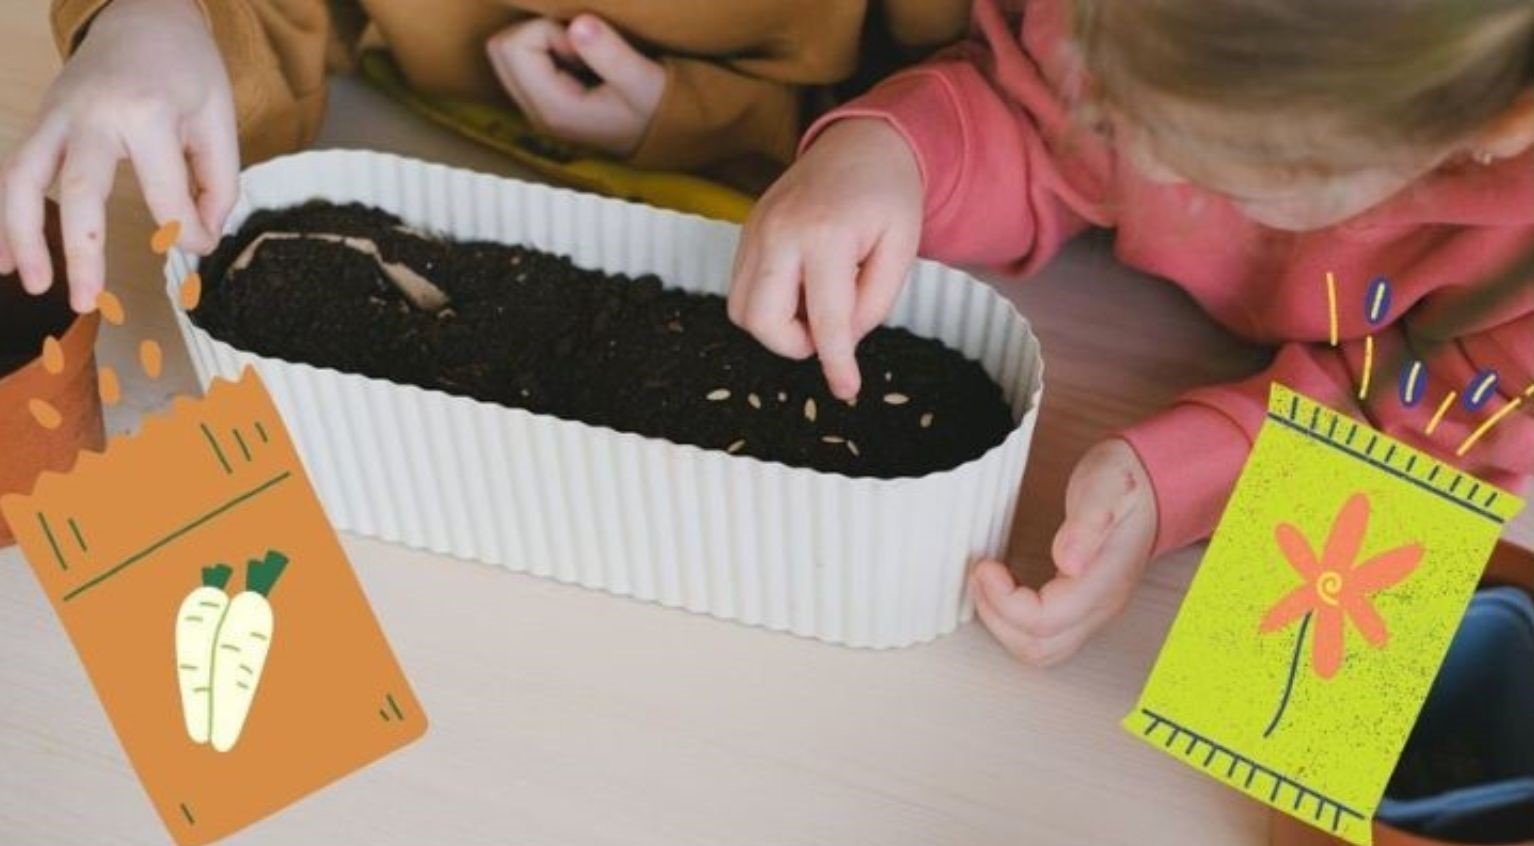 Kids in Dorset can learn to sow seeds during Easter